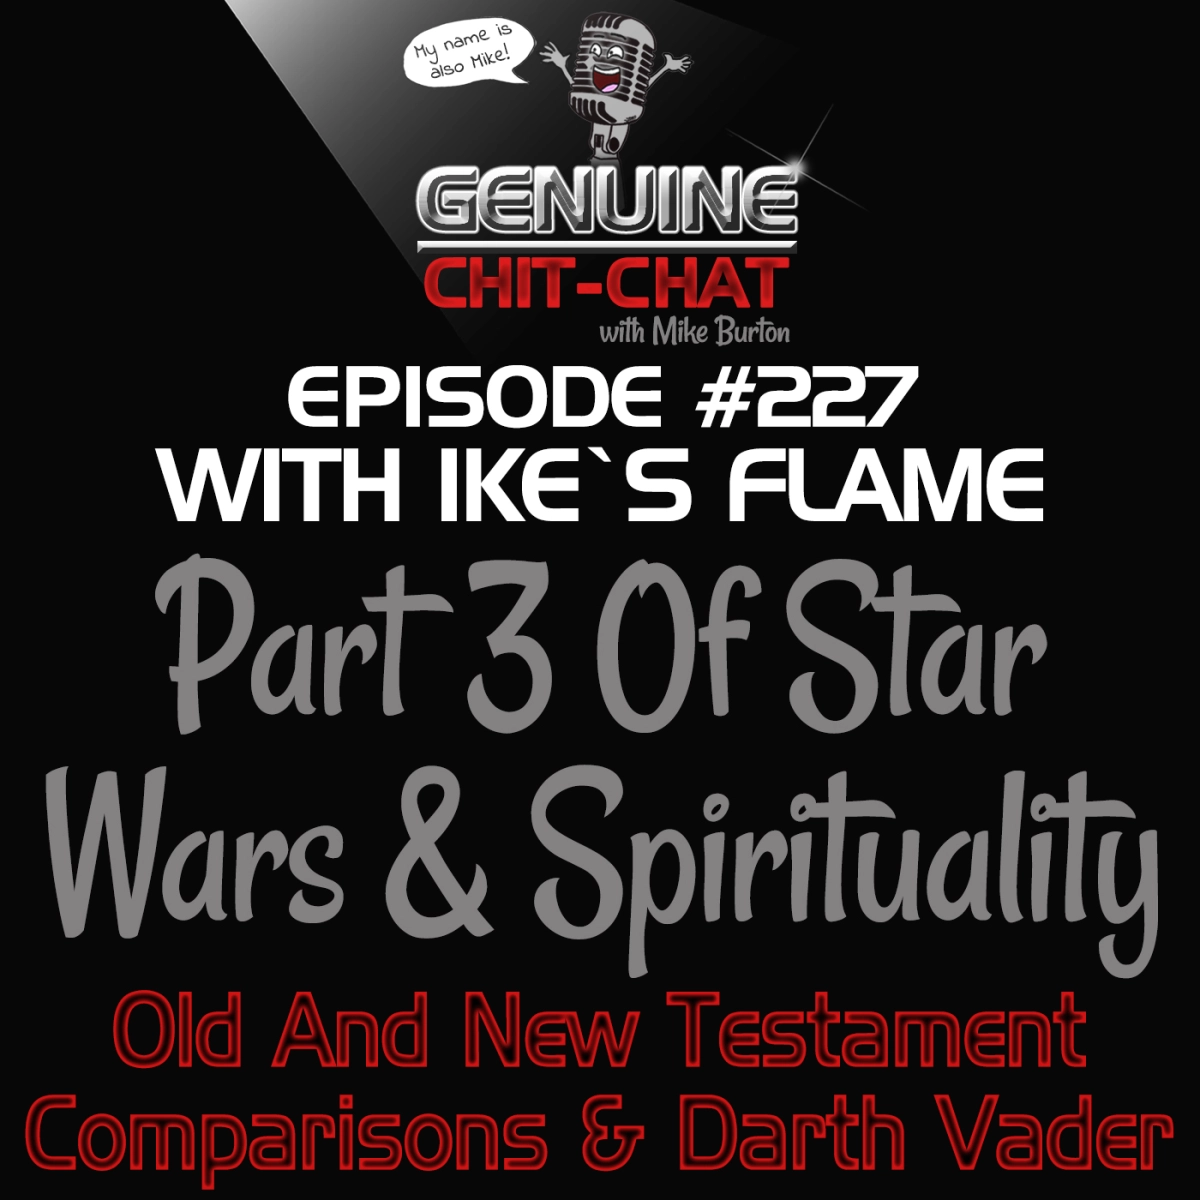 #227 – Part 3 Of Star Wars And Spirituality: Old & New Testament Comparisons And Darth Vader With Ike’s Flame